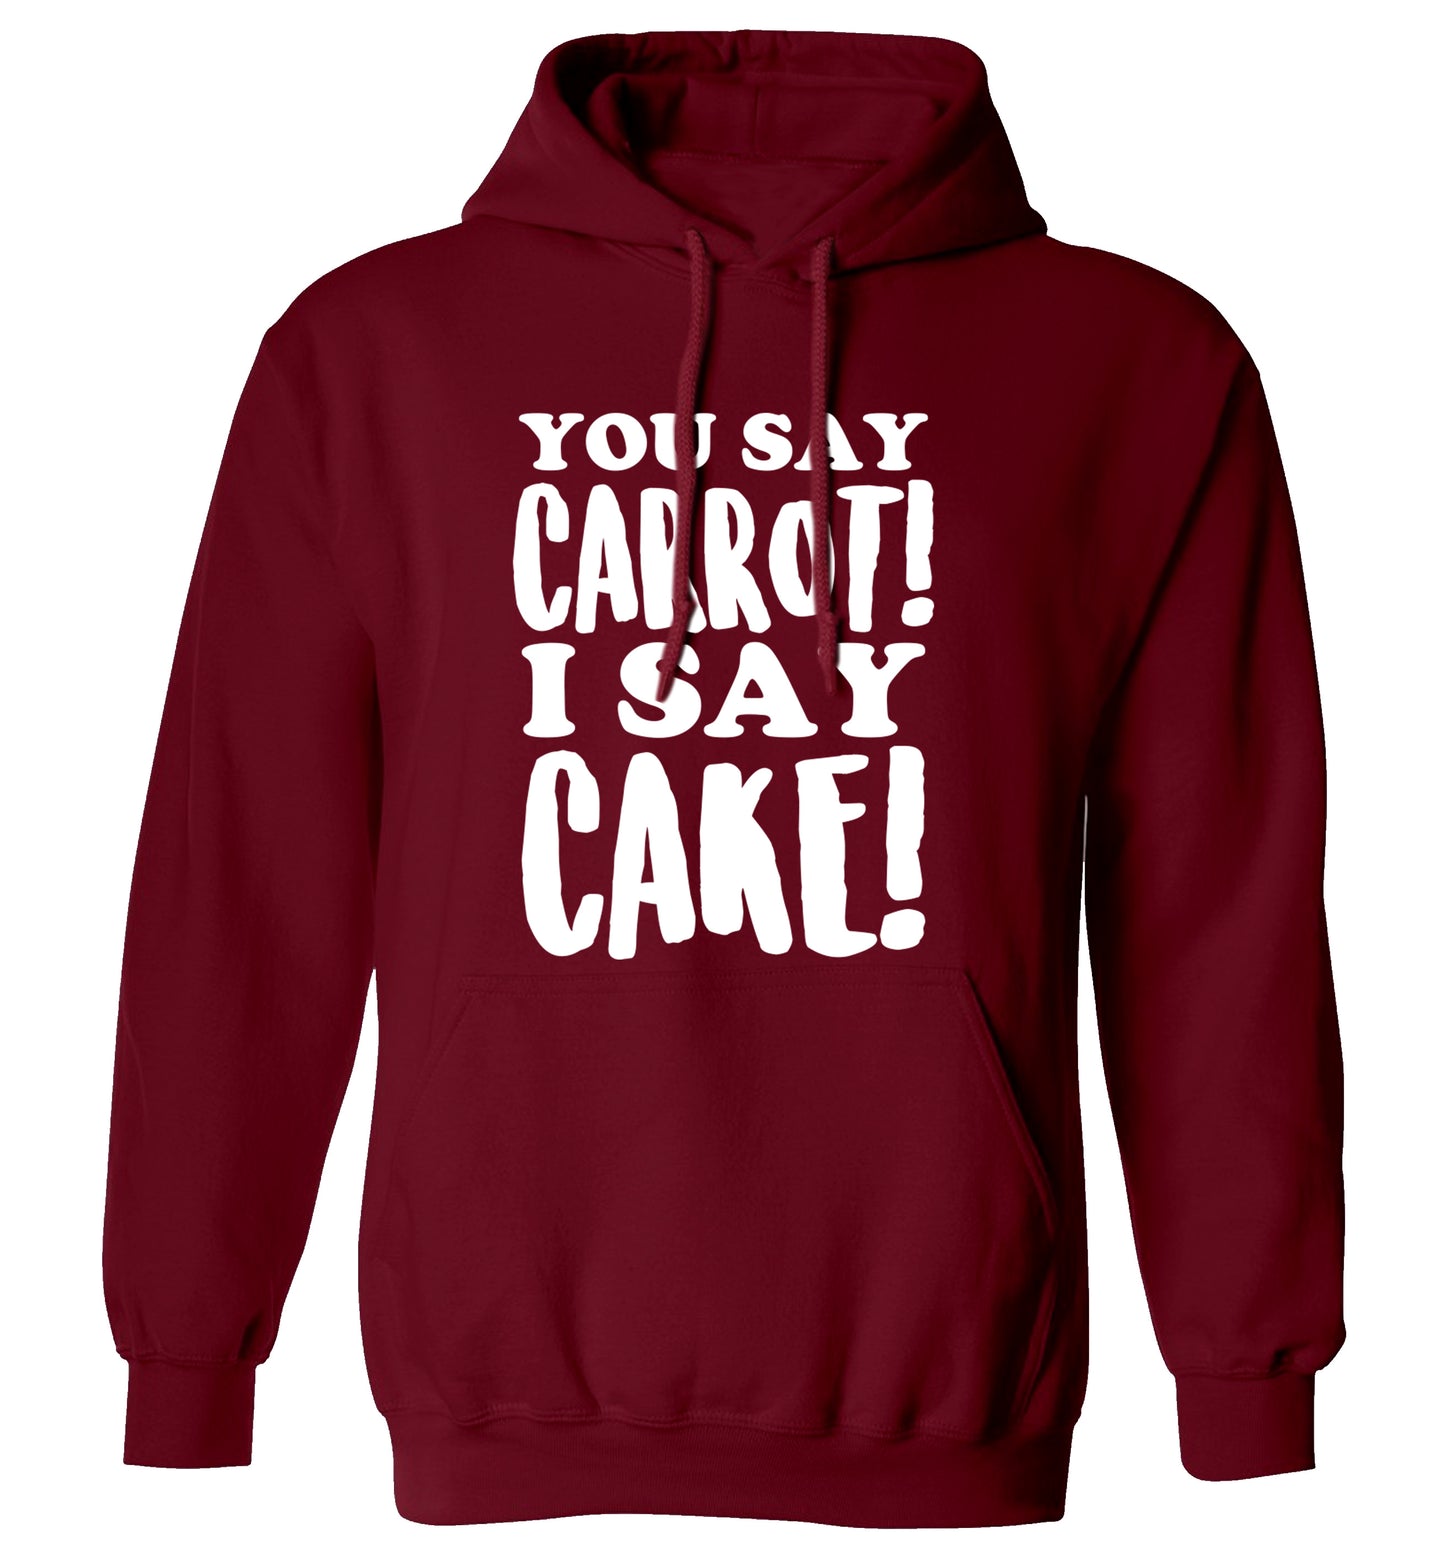 You say carrot I say cake! adults unisex maroon hoodie 2XL